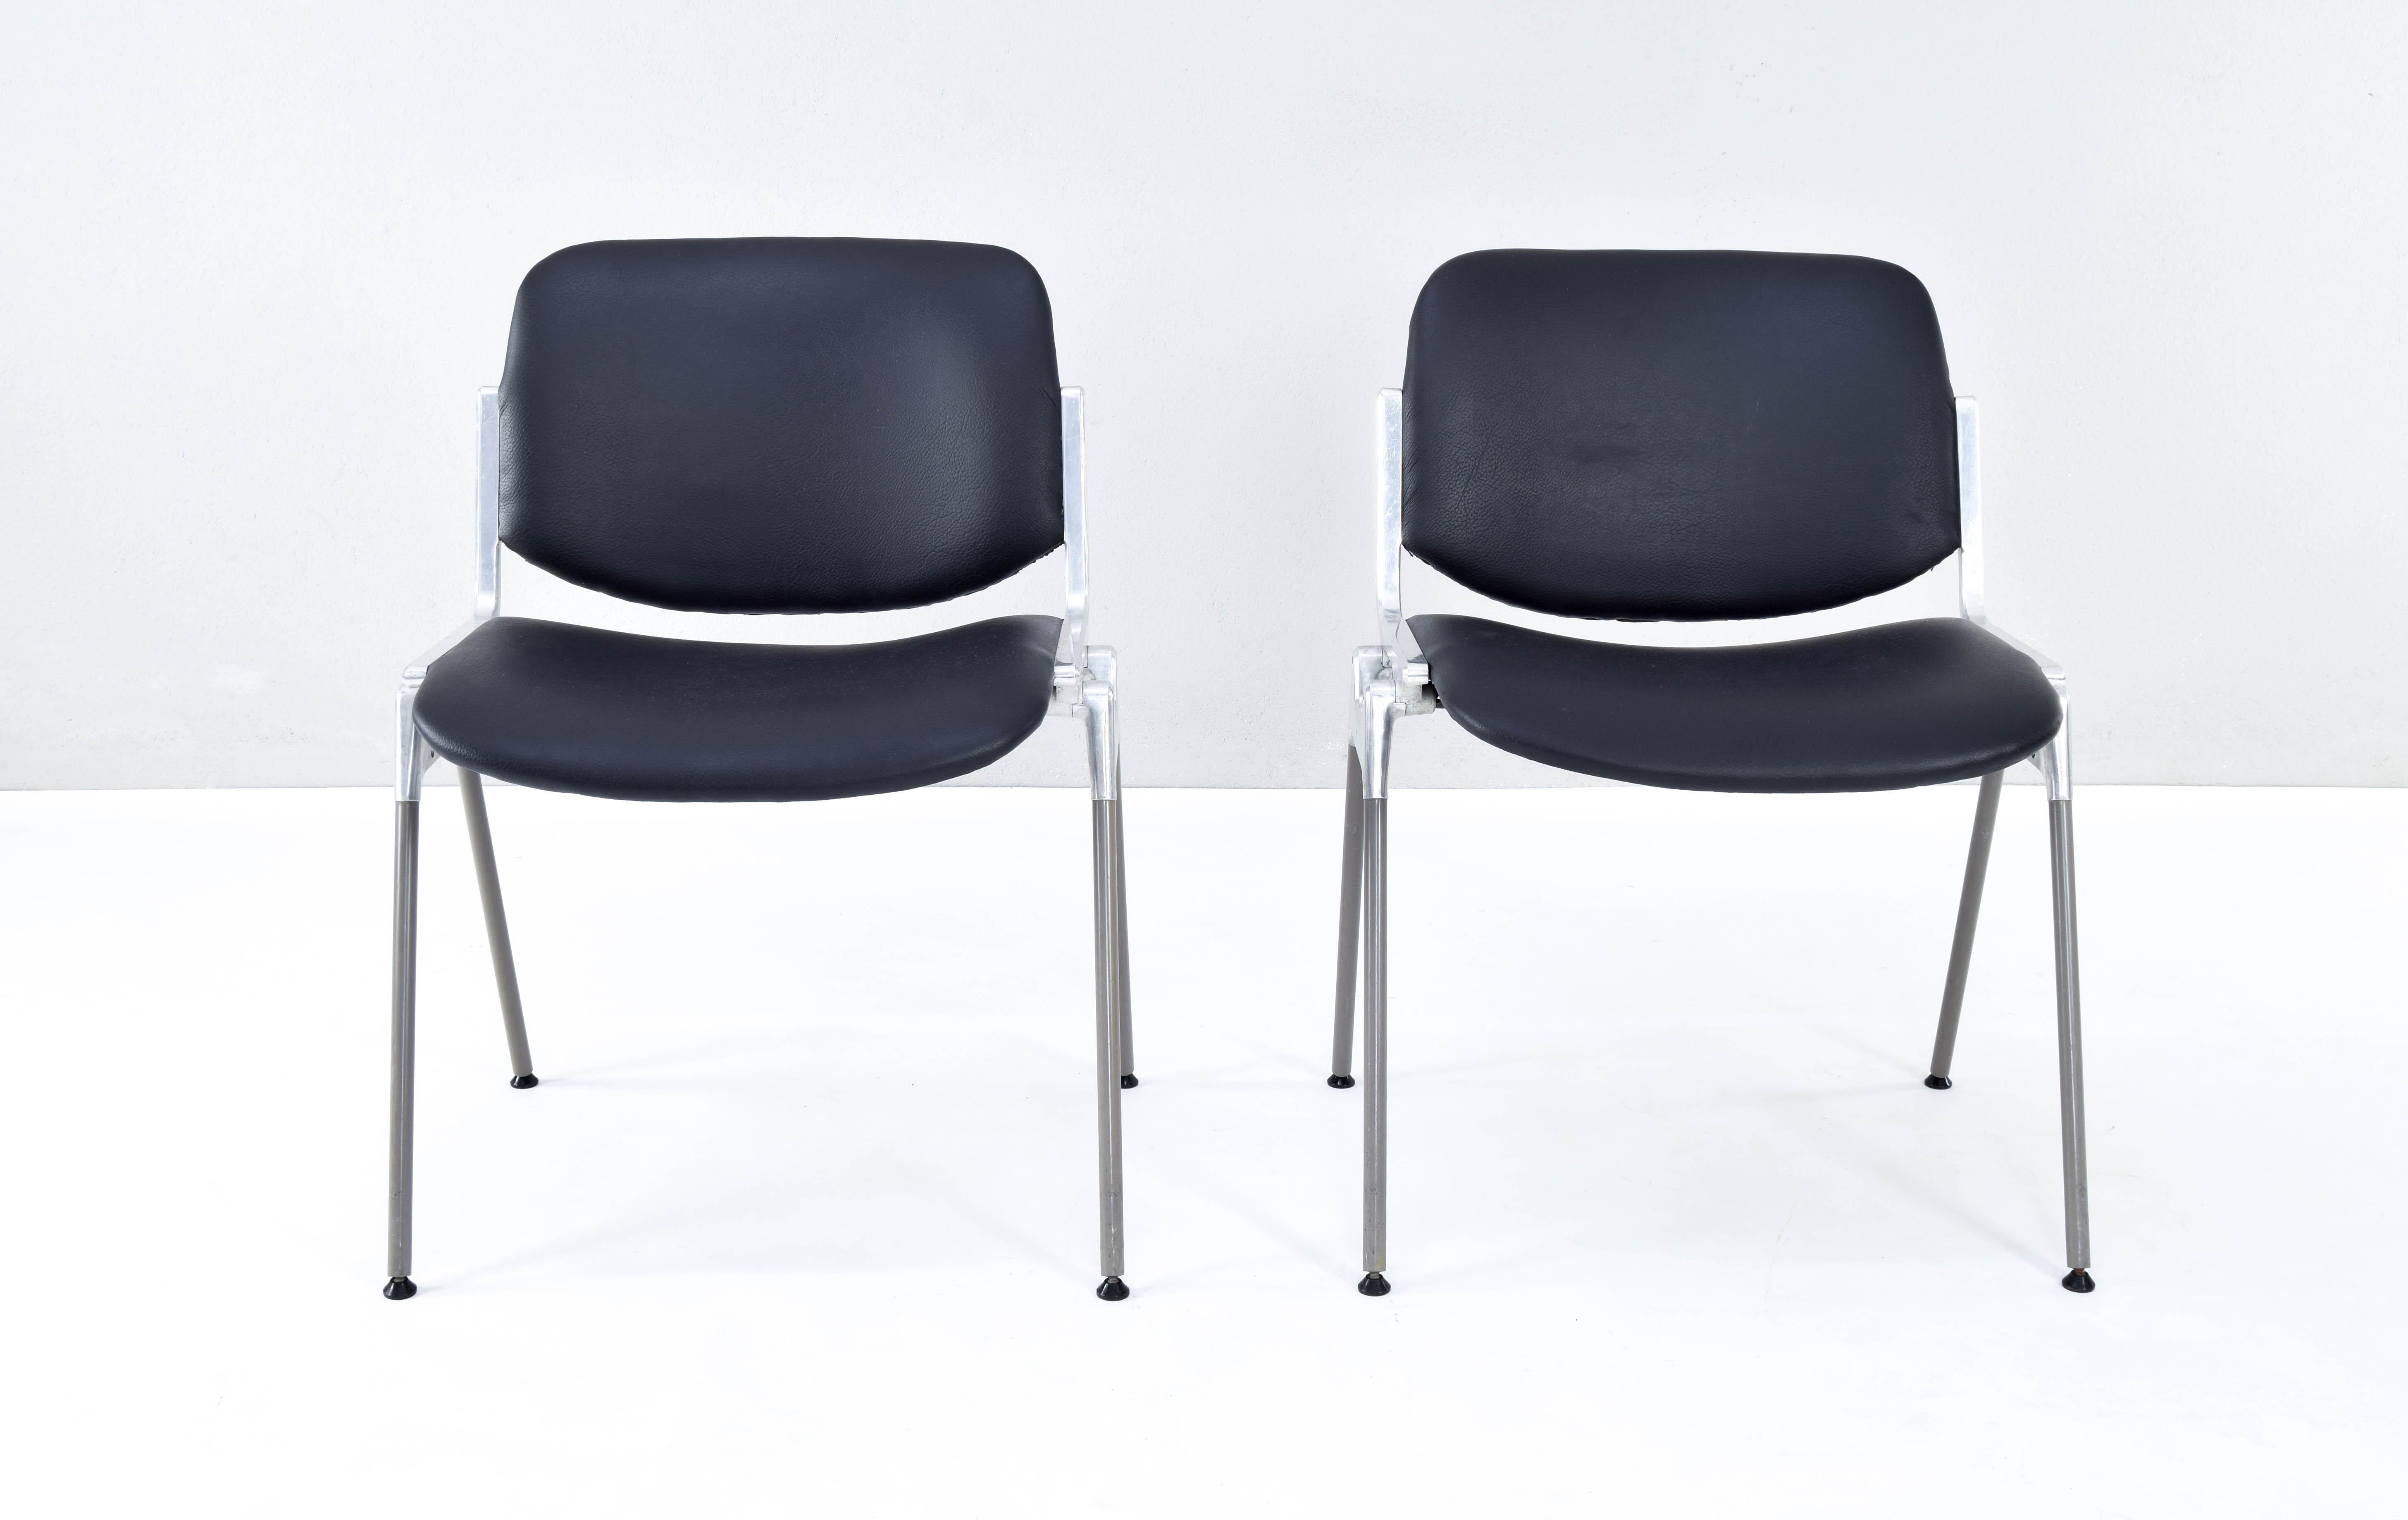 Set of two stackable chairs model DSC 106 designed by Giancarlo Piretti in 1965 and produced by the Italian firm Castelli. 
Aluminum and steel structure, original upholstery in black synthetic leather in good condition.
Measurements:
High 77